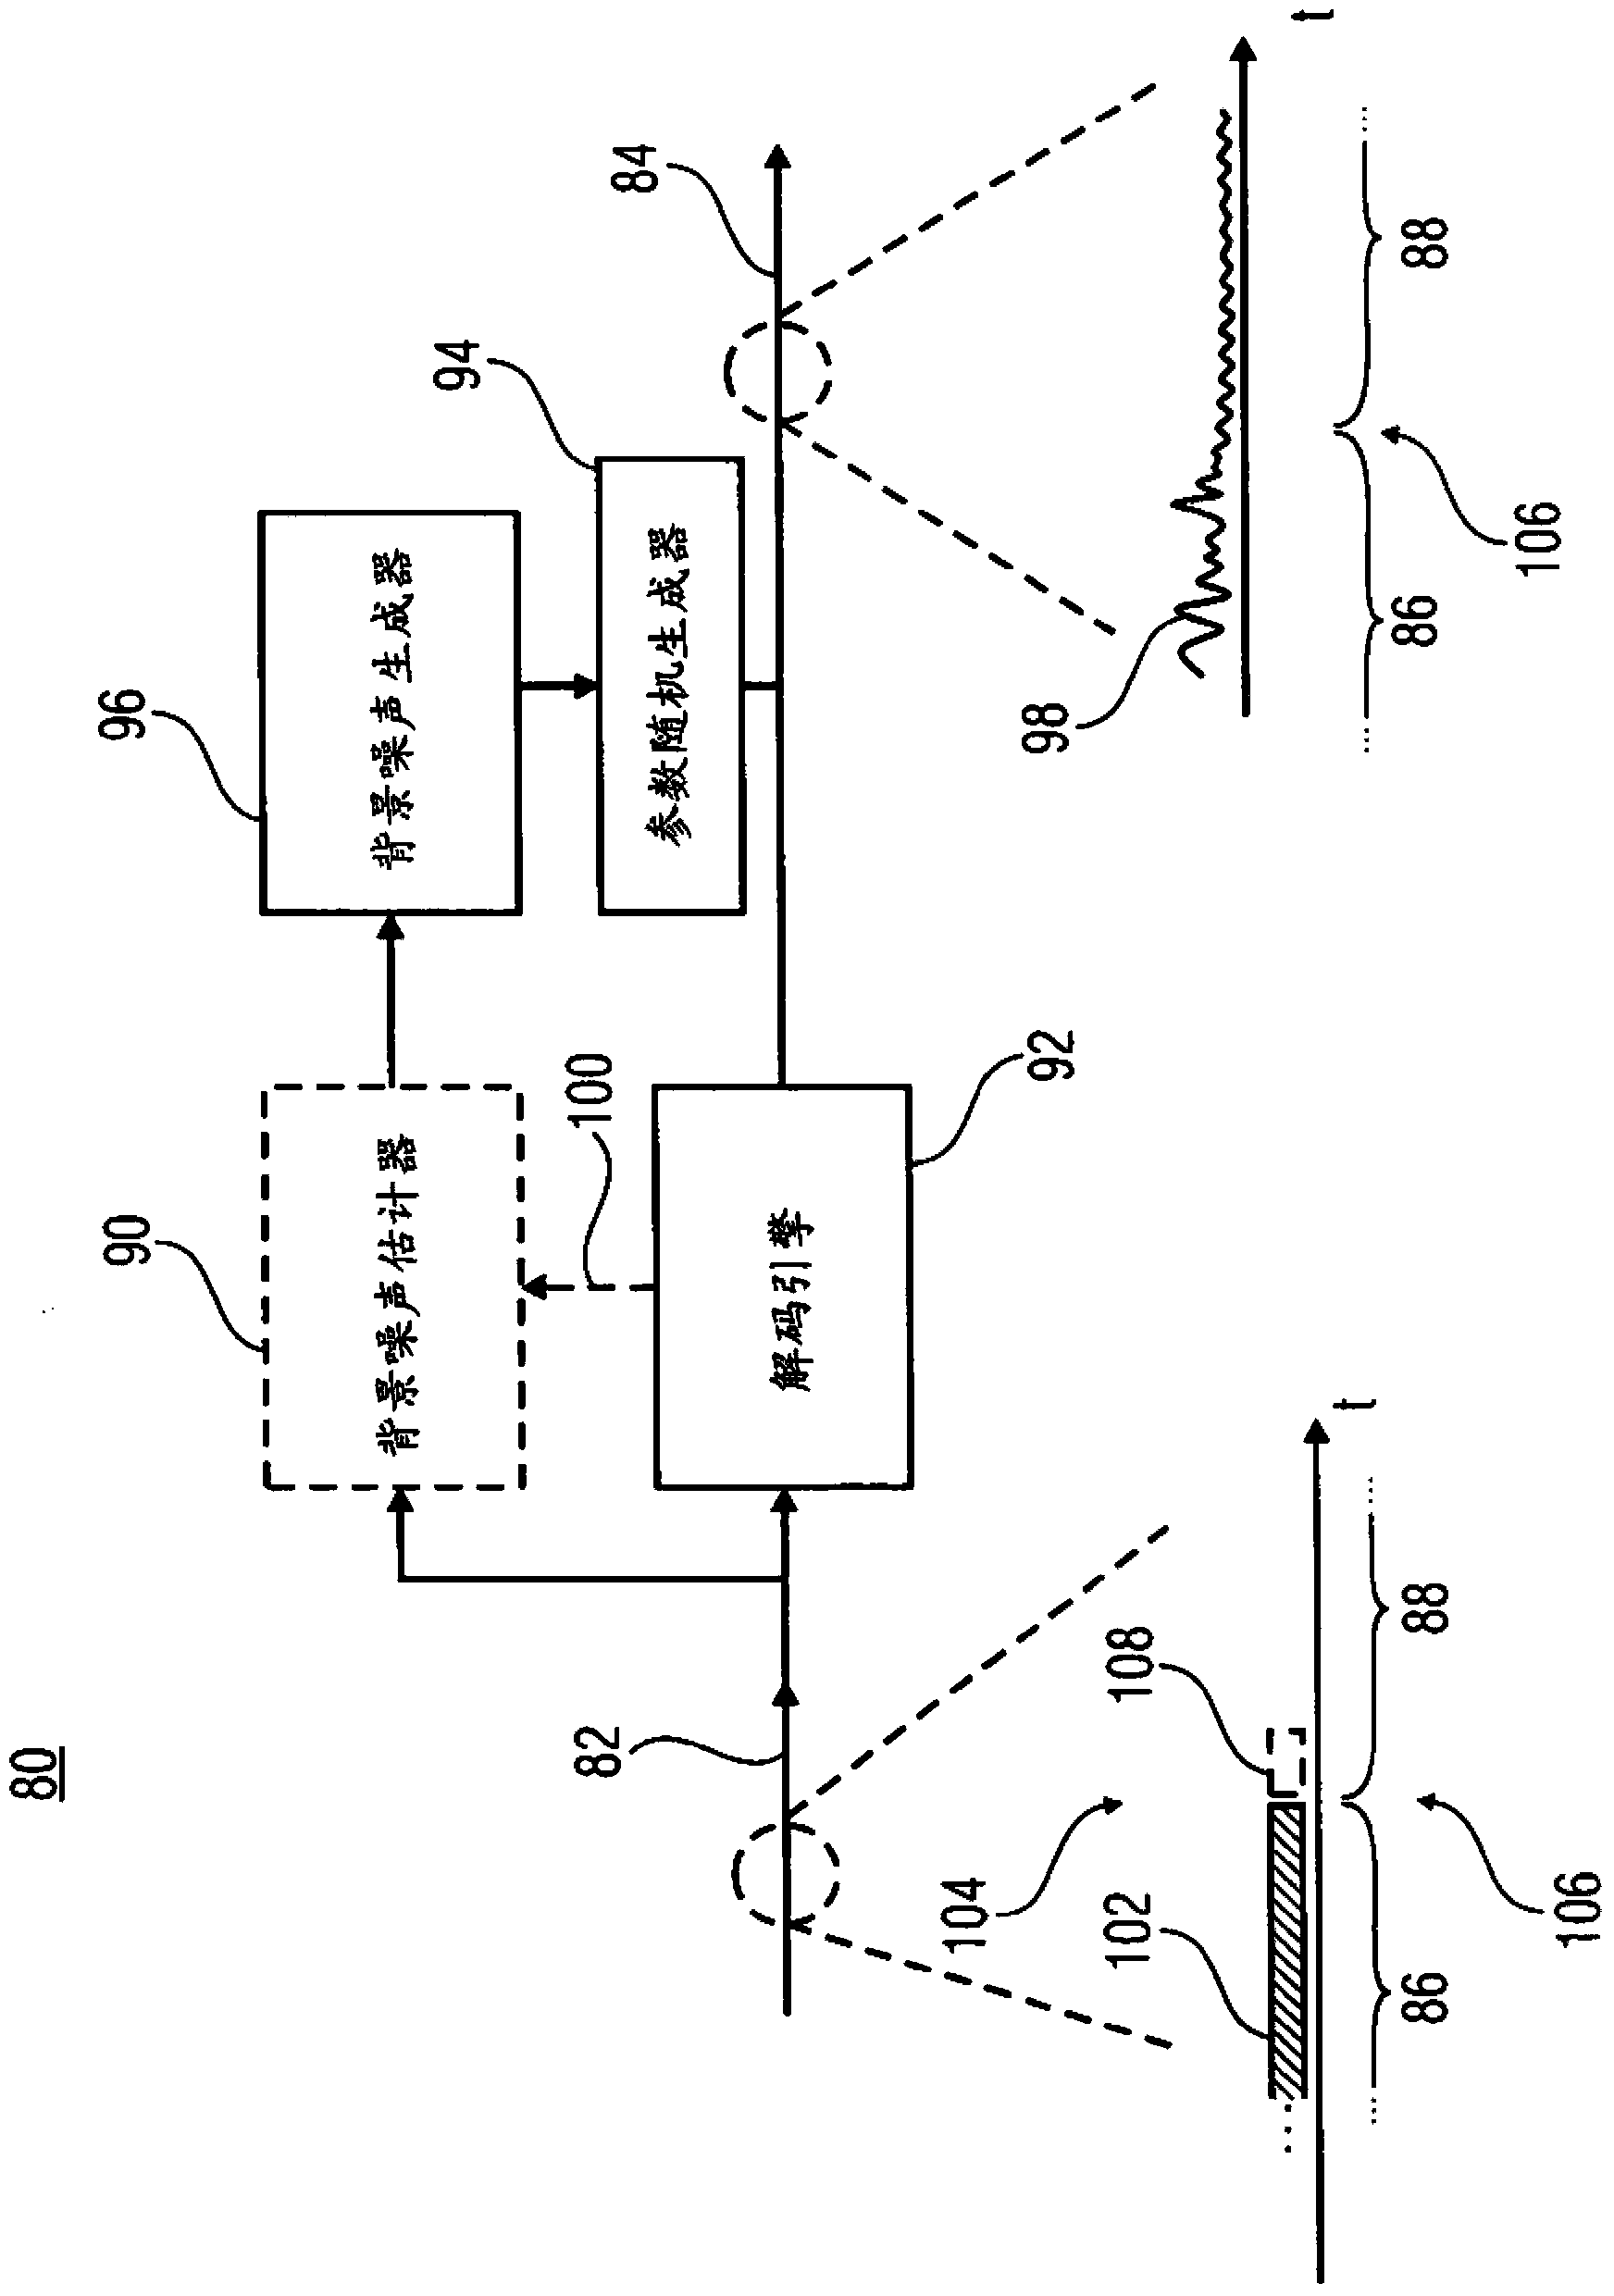 Audio codec using noise synthesis during inactive phases